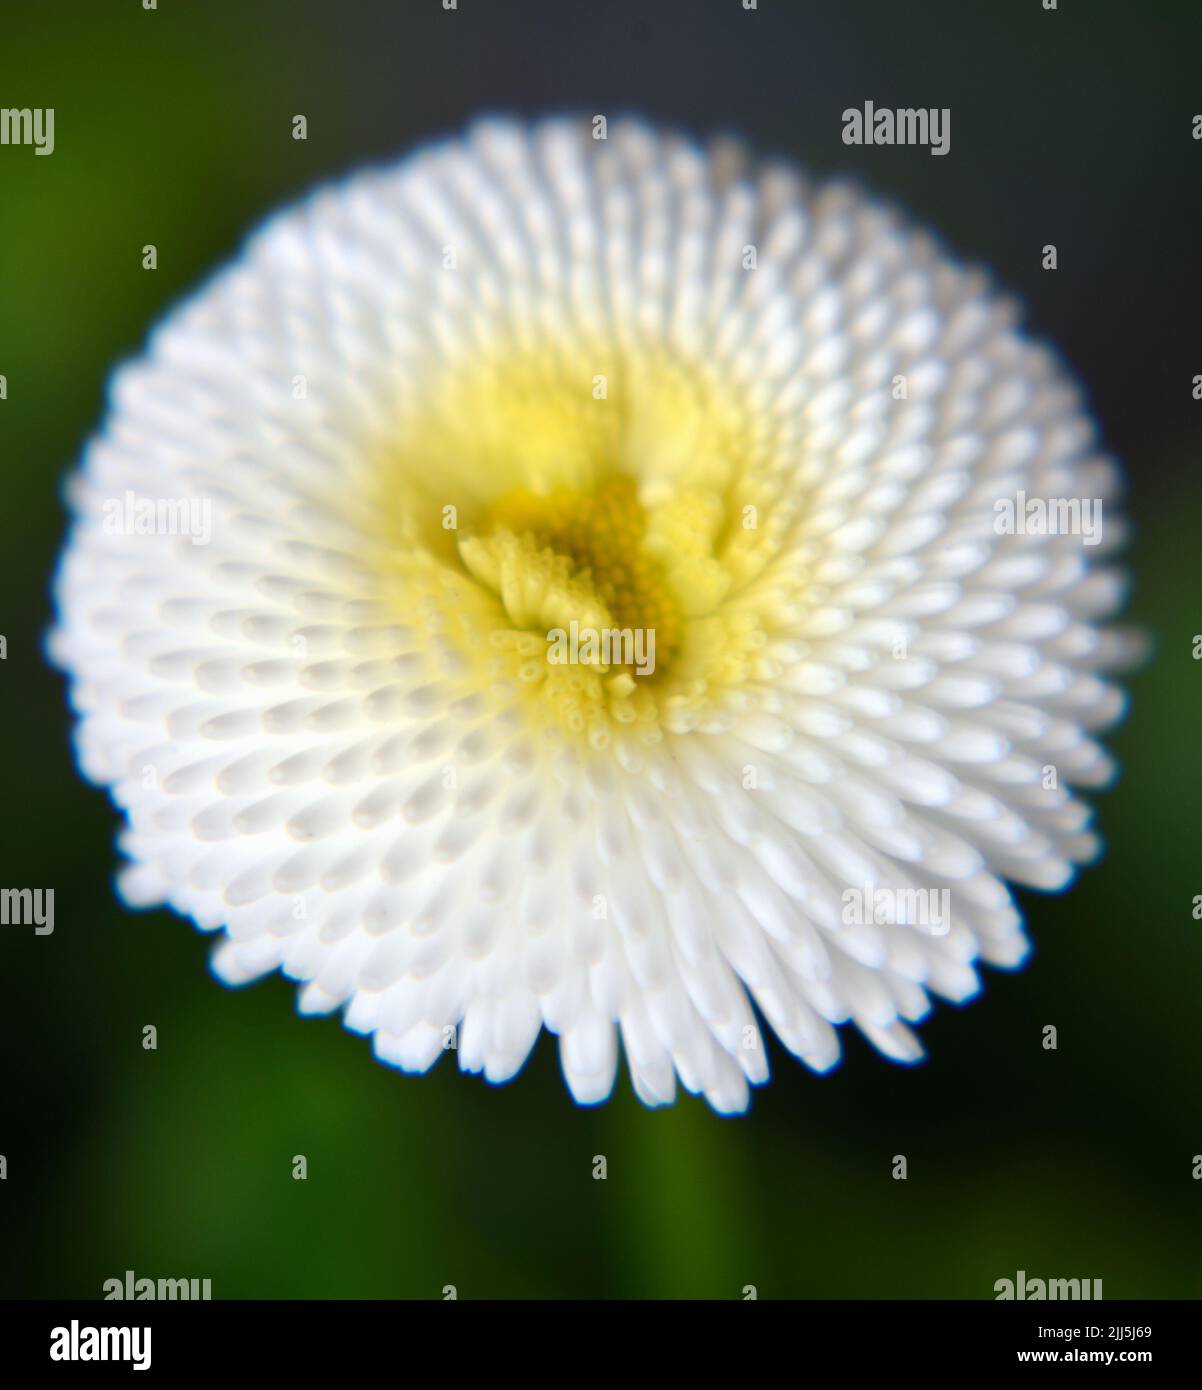 Closeup of a white  English daisy (Bellis perennis) flower with yellow center. Stock Photo